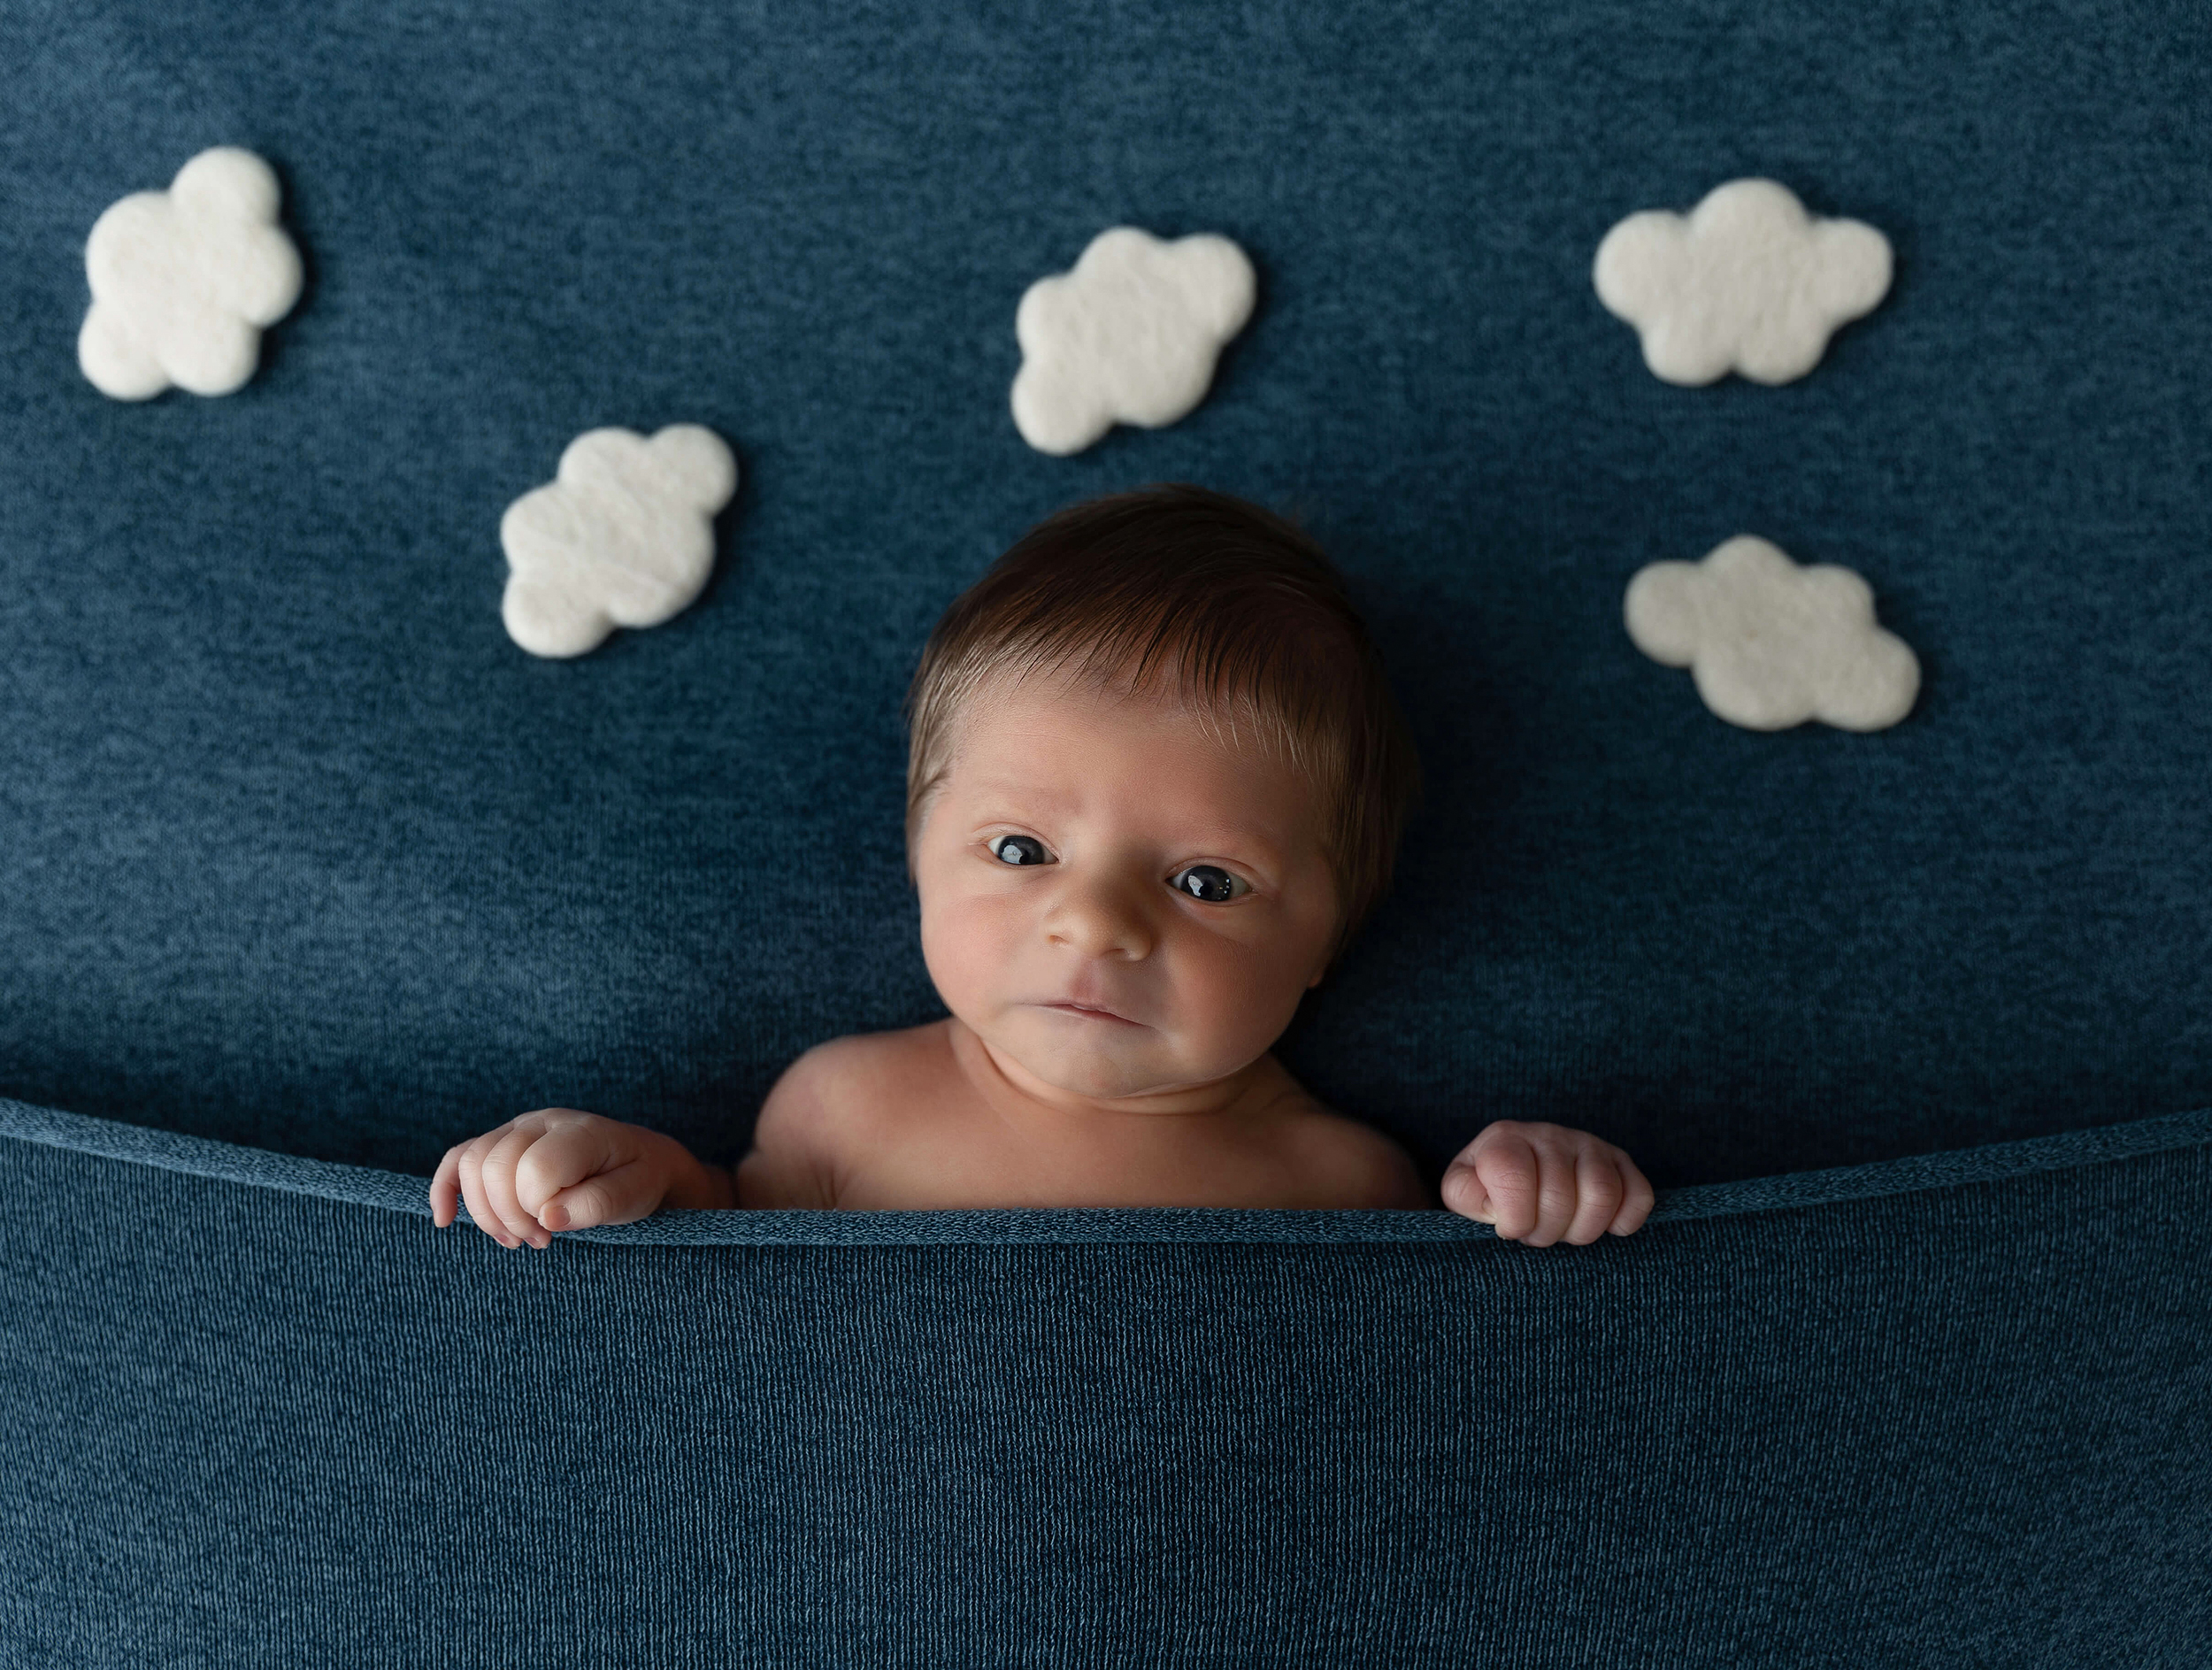 Newborn baby laying on a blue blanket with clouds